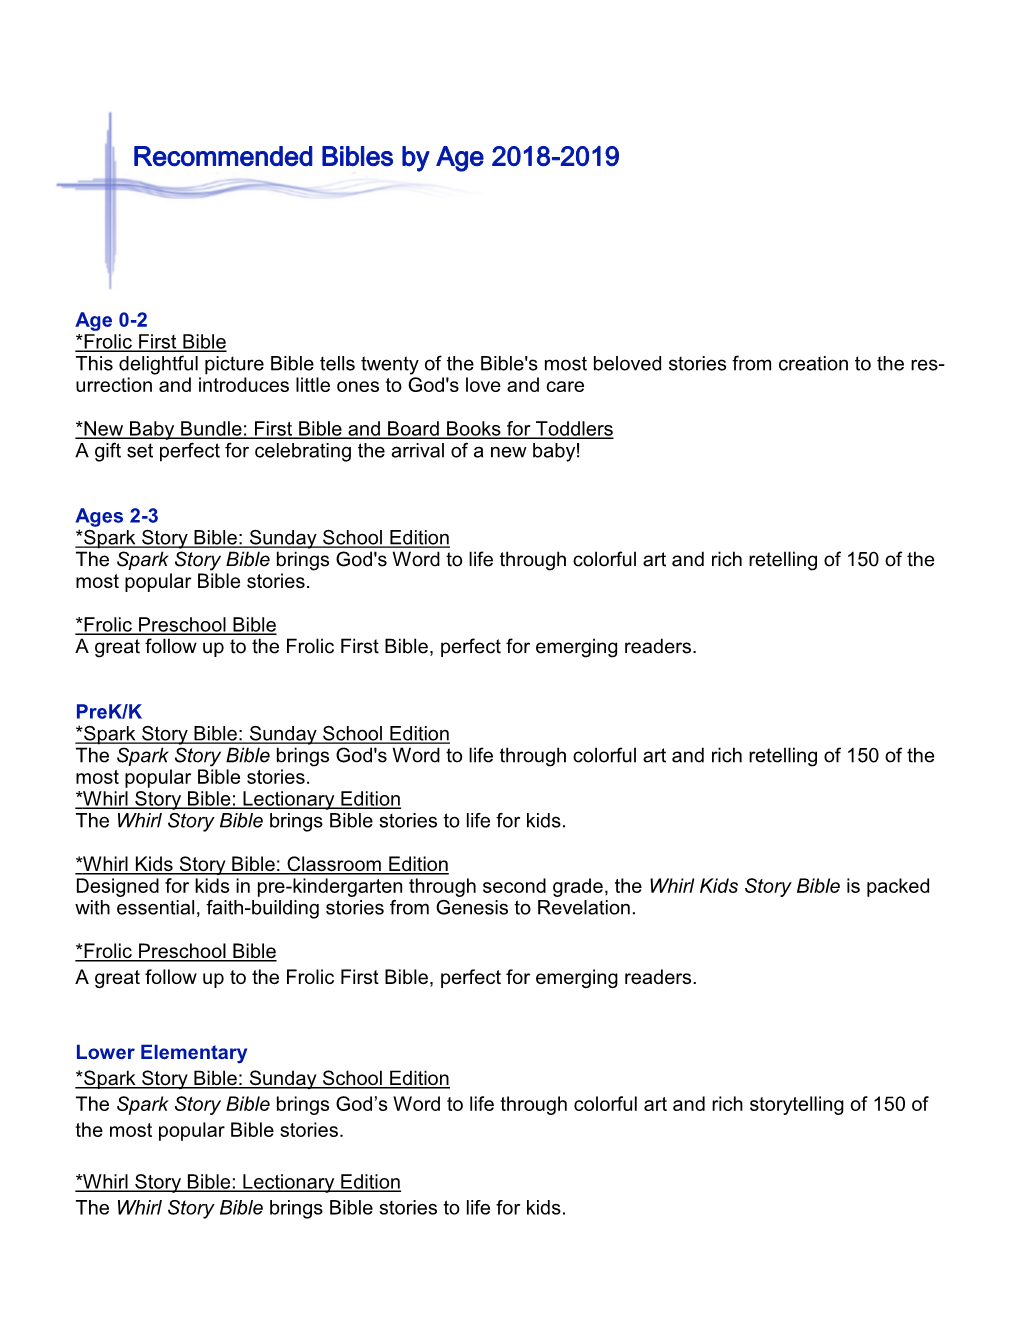 Recommended Bibles by Age 2018-2019